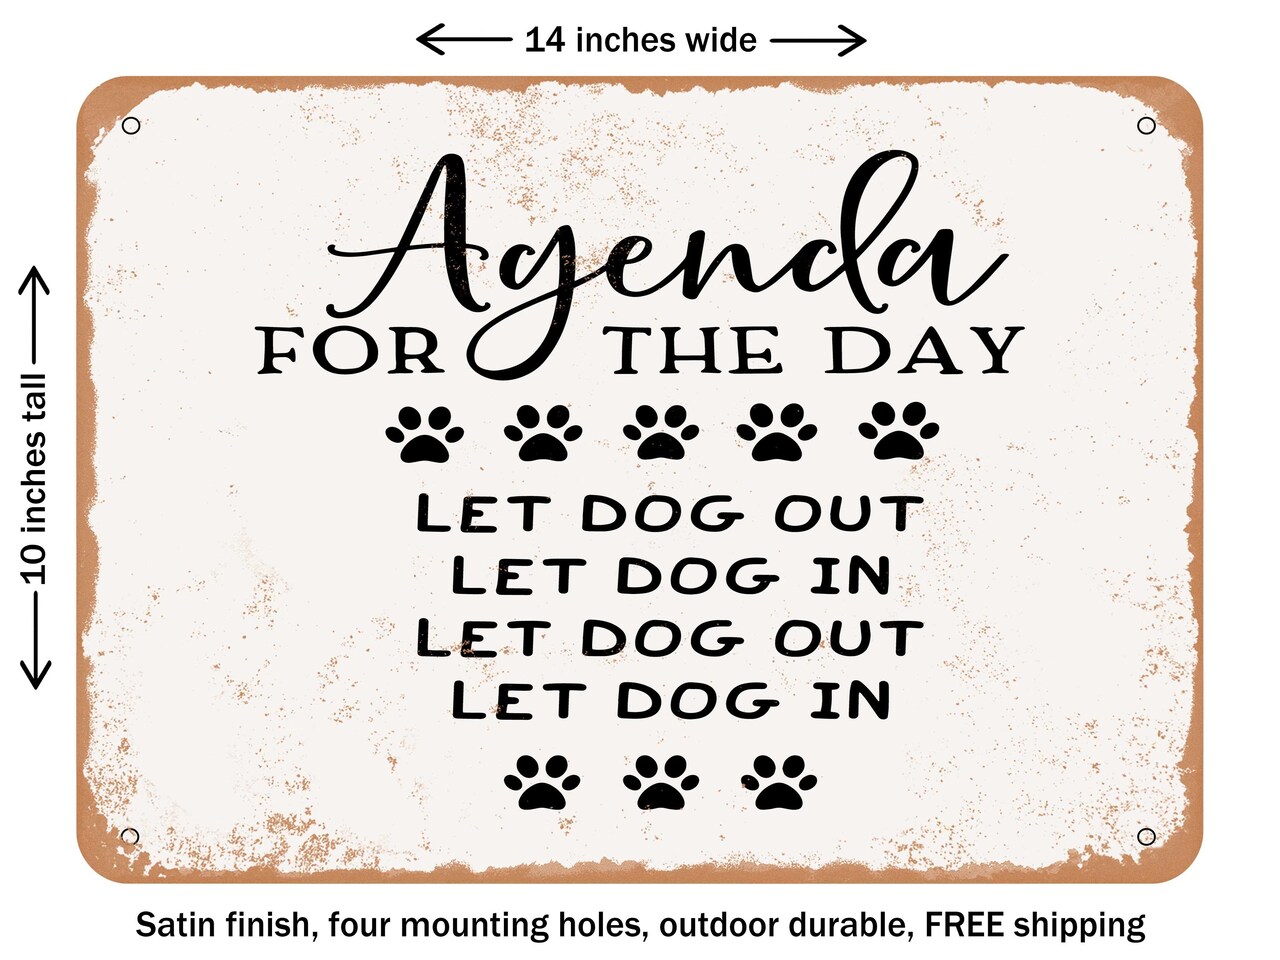 DECORATIVE METAL SIGN - Agenda For the Day - Vintage Rusty Look